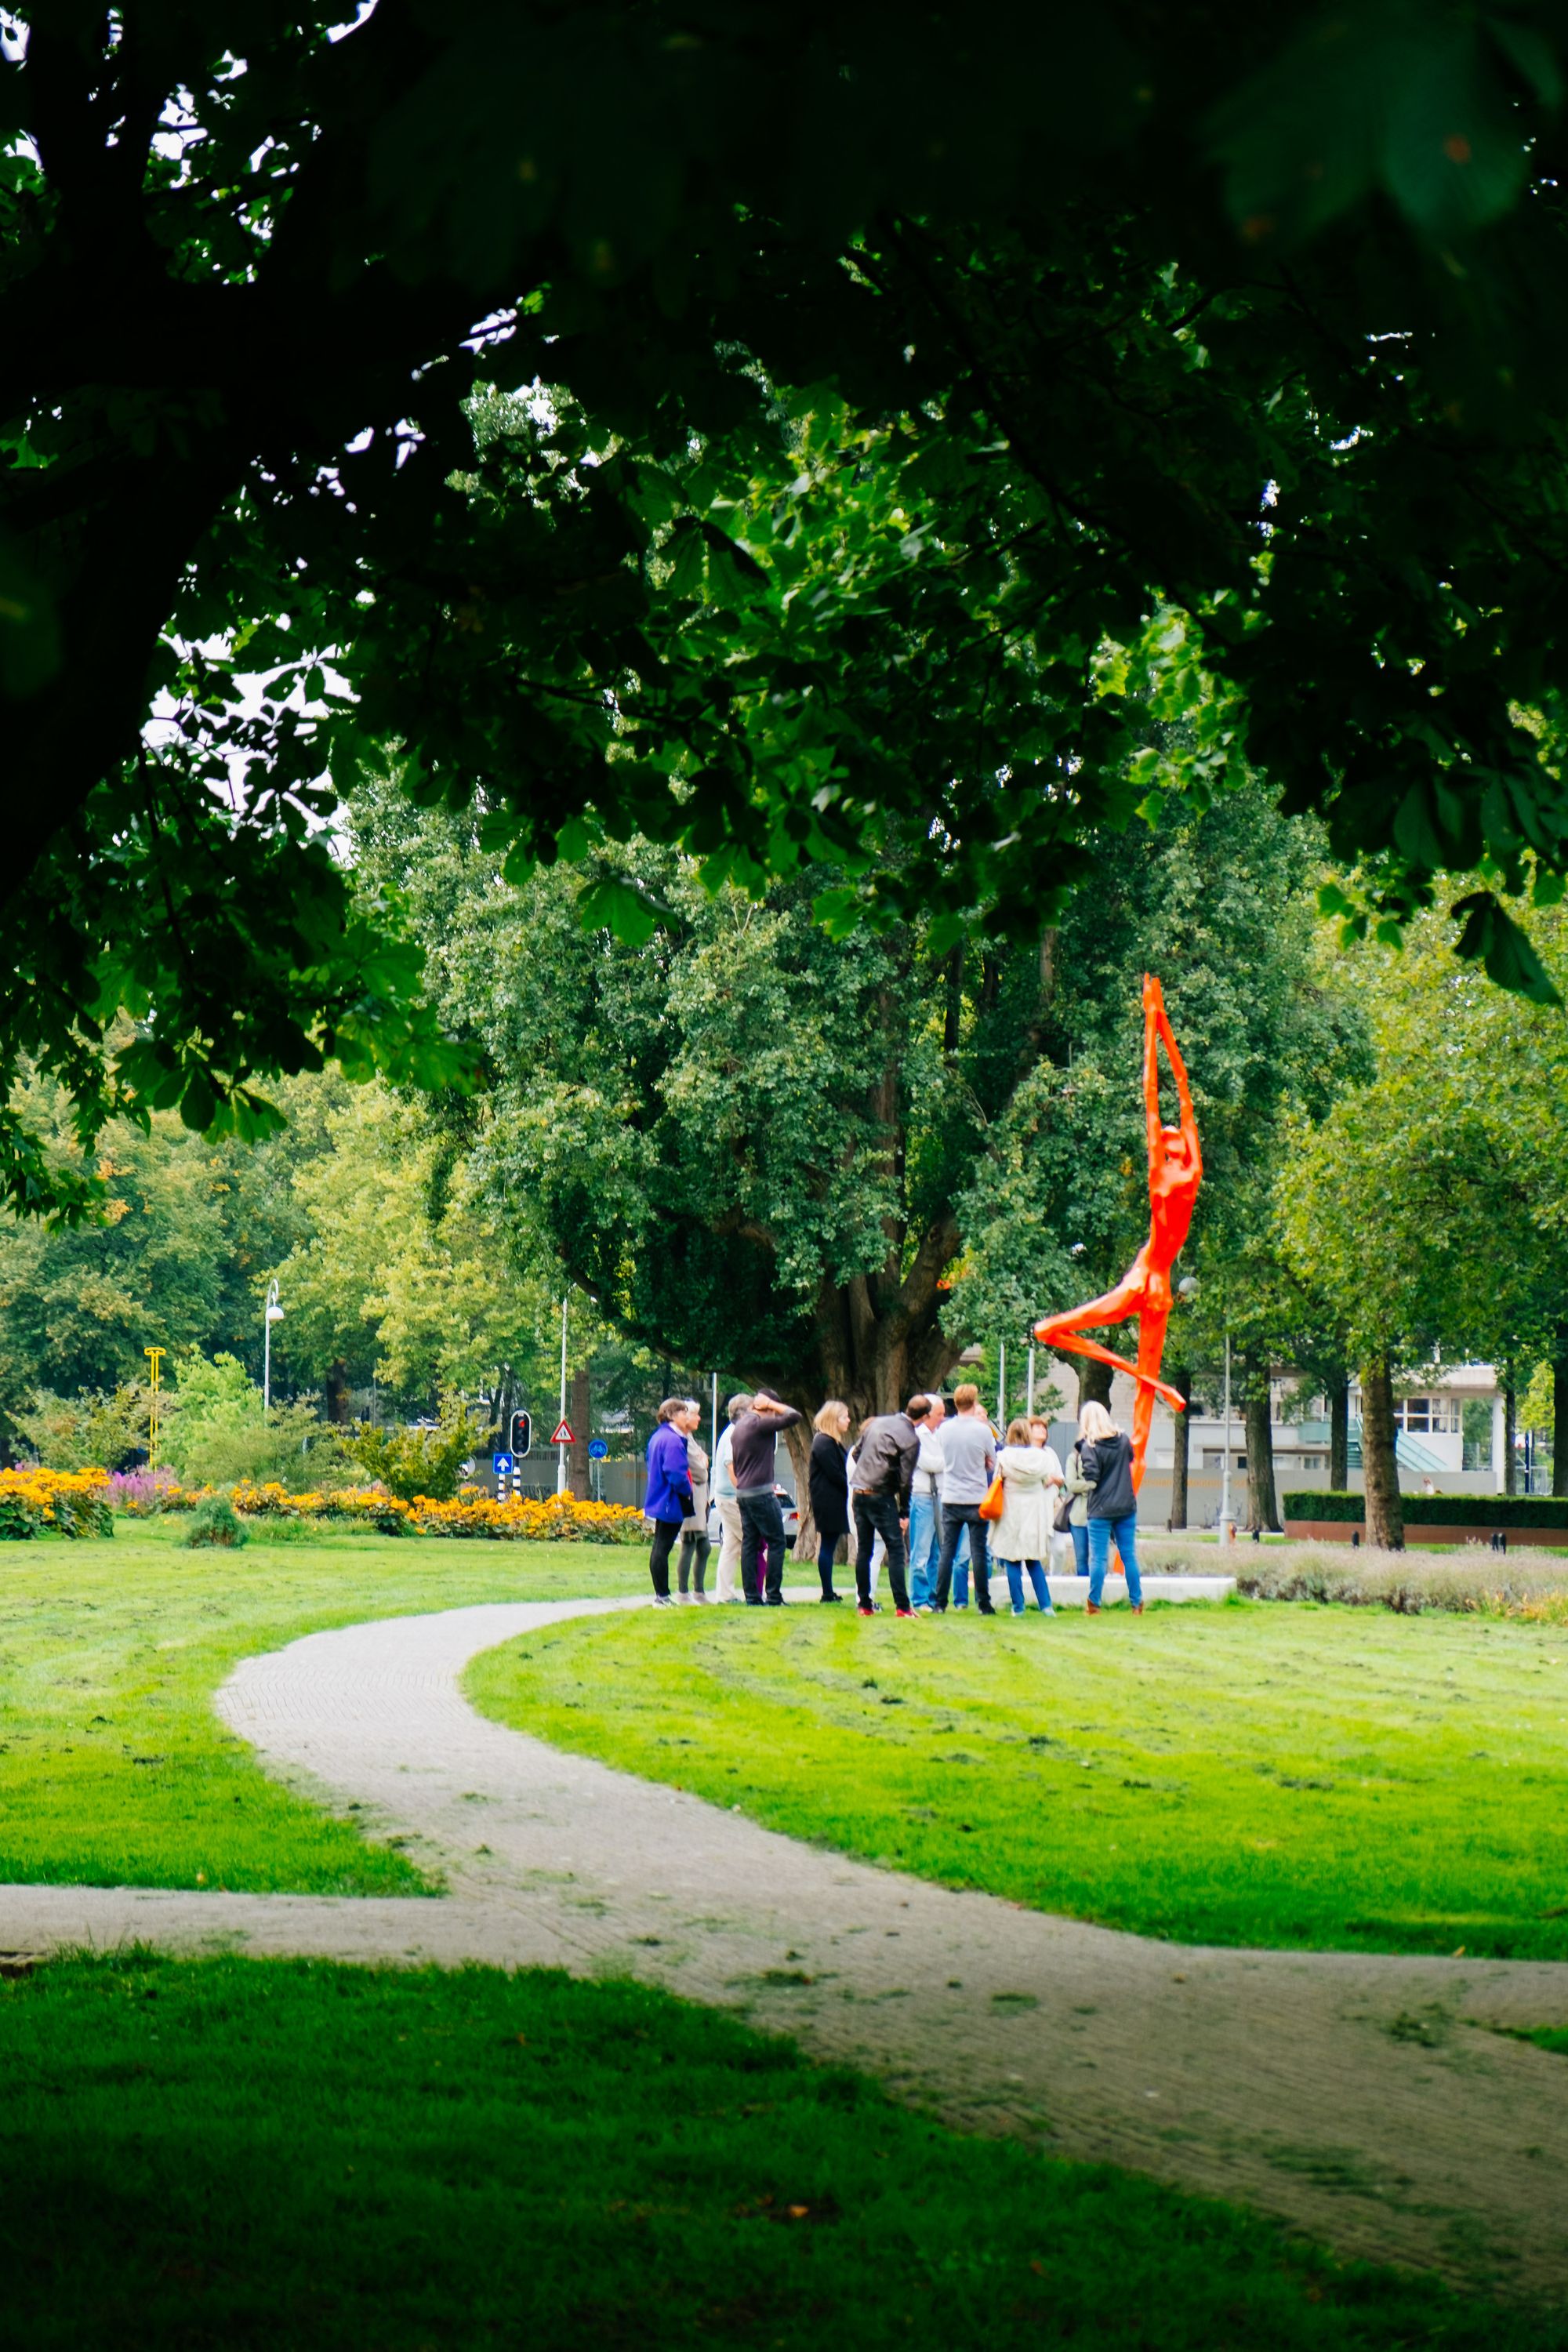 ArtZuid 2015: Sculpture route in Amsterdam's Old South